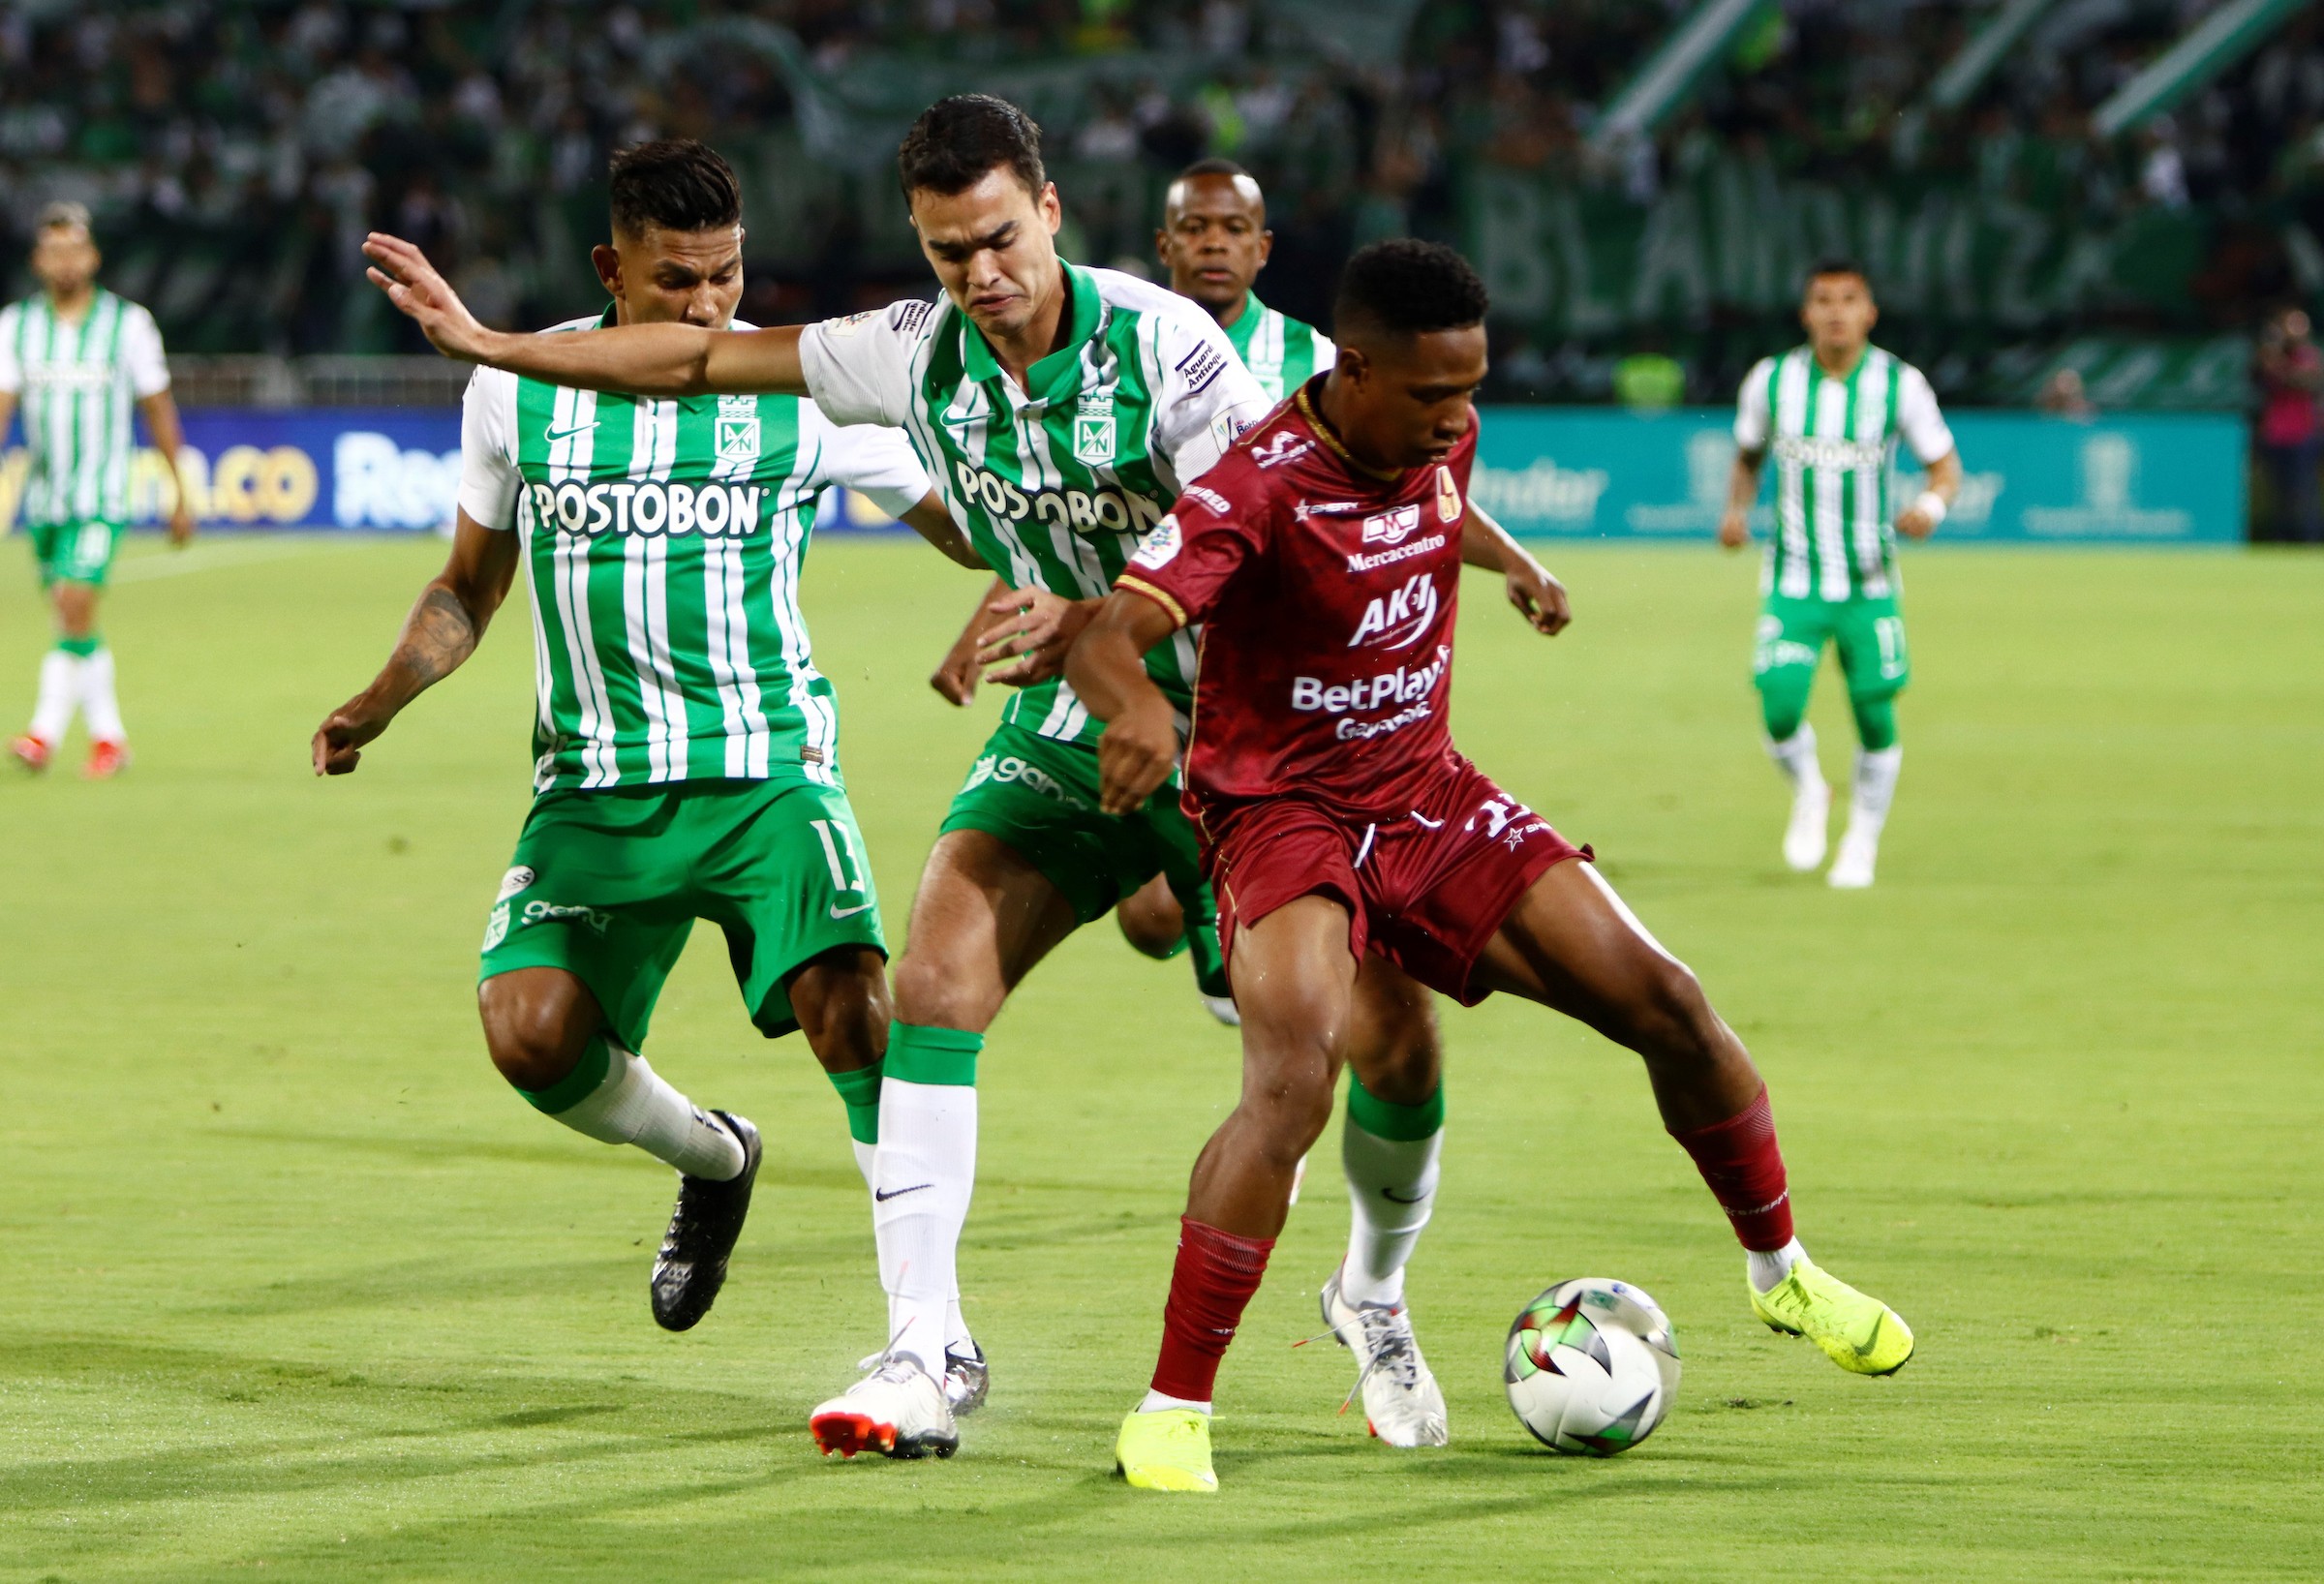 In the image, Alexánder Mejía and Felipe Aguilar chasing Andrés Ibargüen in the game between Atlético Nacional and Deportes Tolima at the Atanasio Girardot stadium in Medellín / (Colprensa)